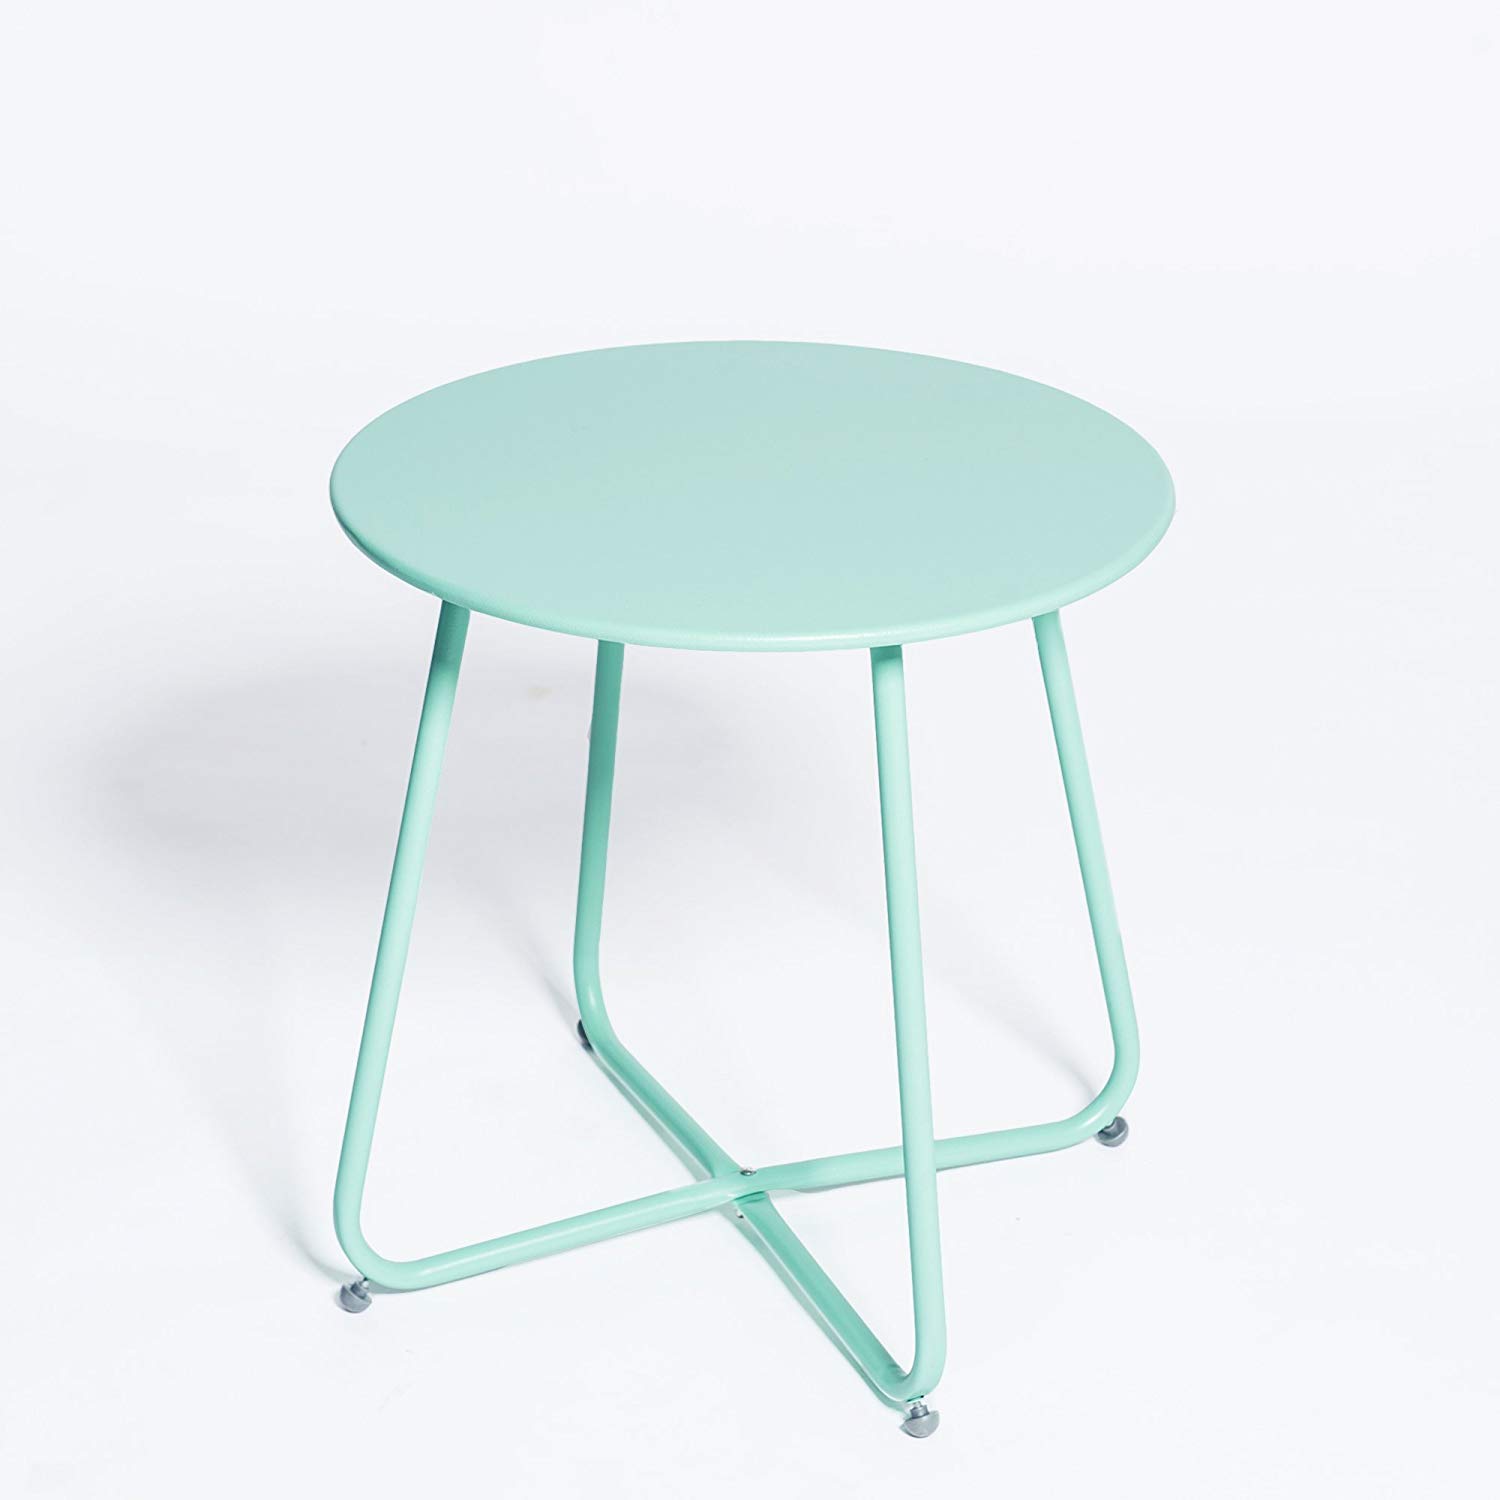 grand live steel small round bistro side table outdoor metal accent indoor ott tray snack coffee anti rusty light blue green threshold cover lewis wood garden furniture support